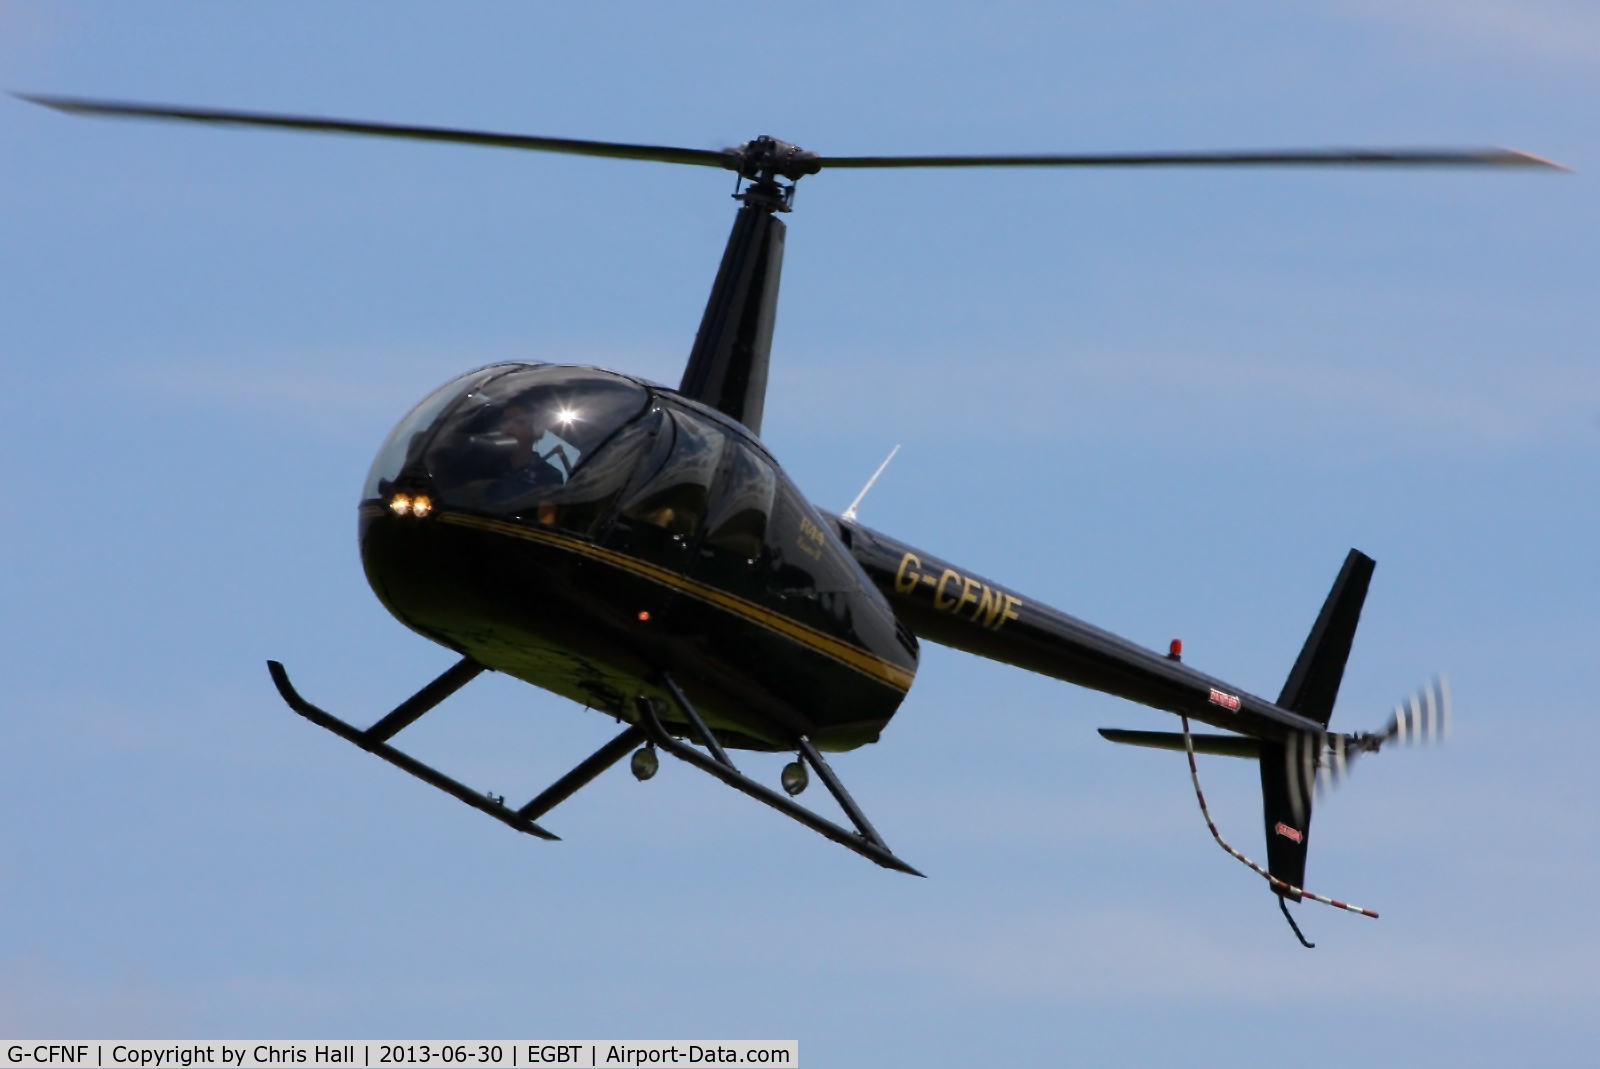 G-CFNF, 2008 Robinson R44 Raven II C/N 12496, being used for ferrying race fans to the British F1 Grand Prix at Silverstone